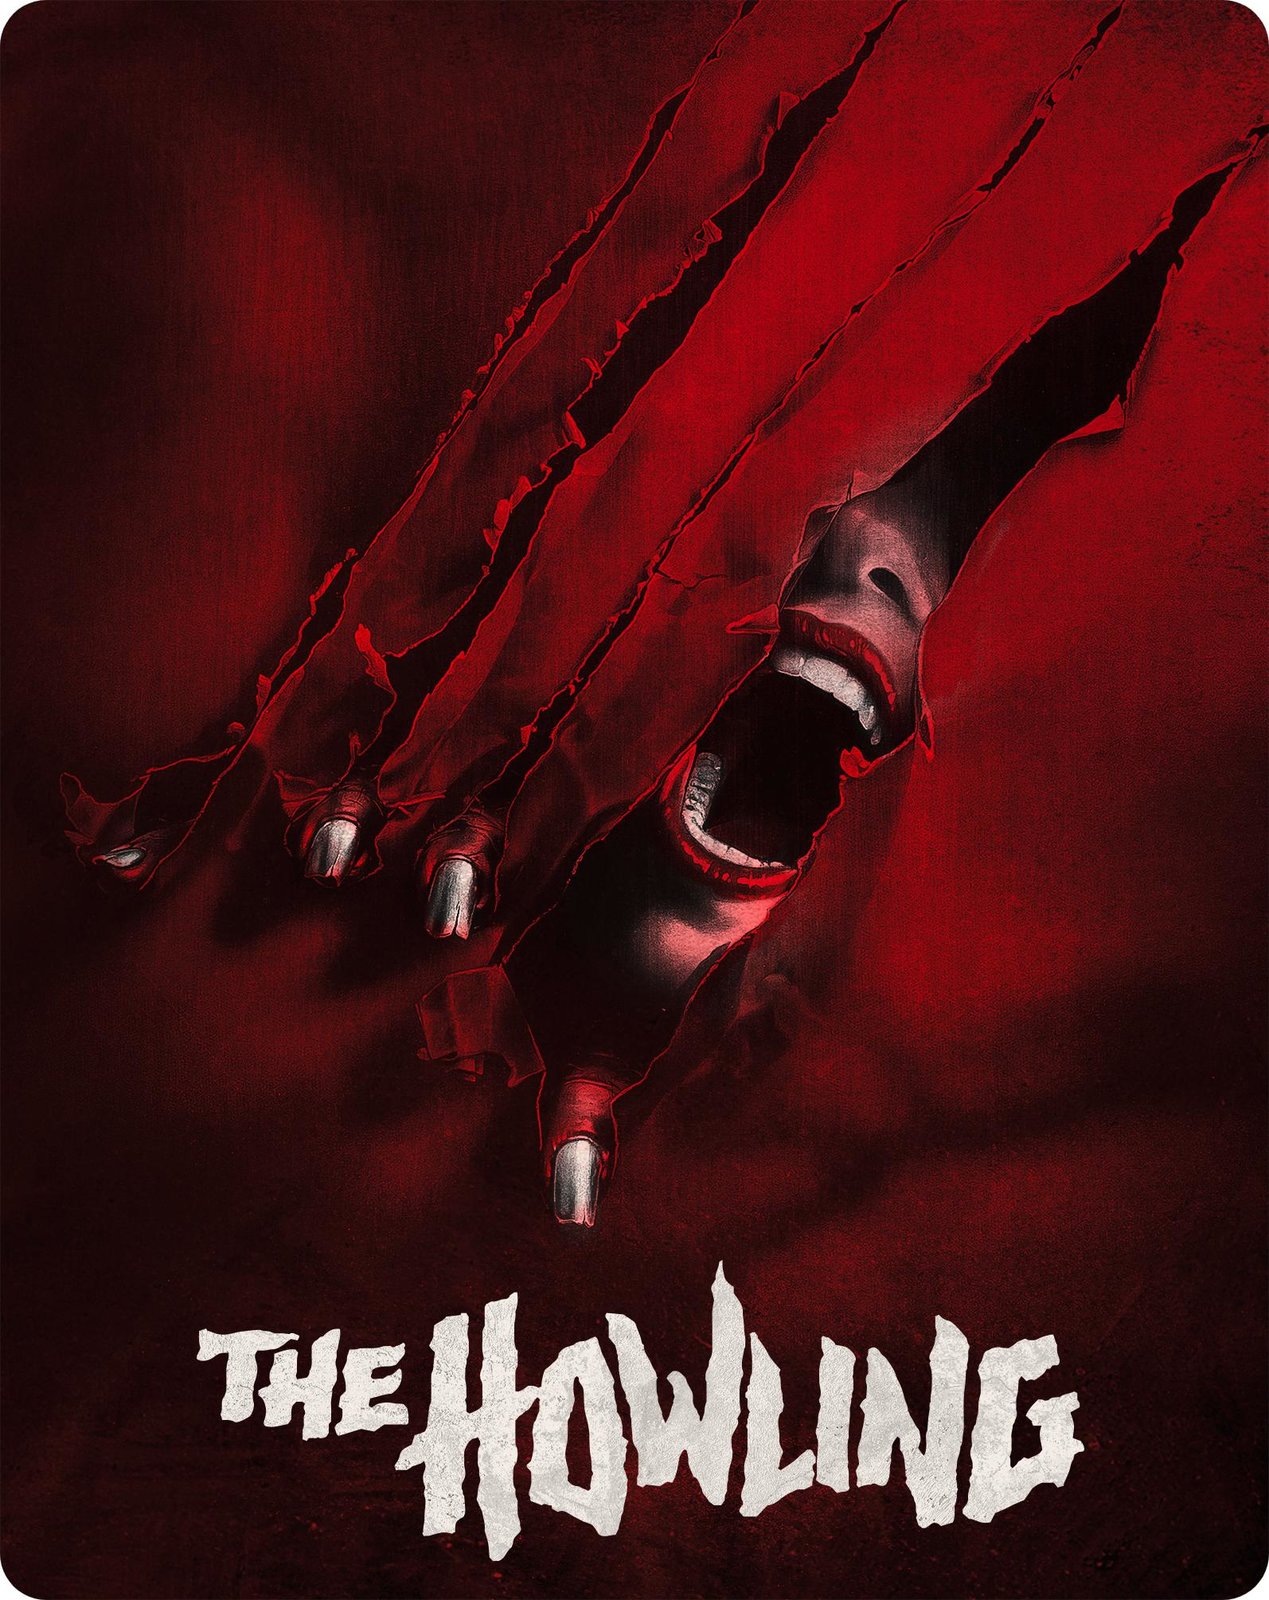 Howling, The - Das Tier - Limited Steelbook Edition (4K UHD)